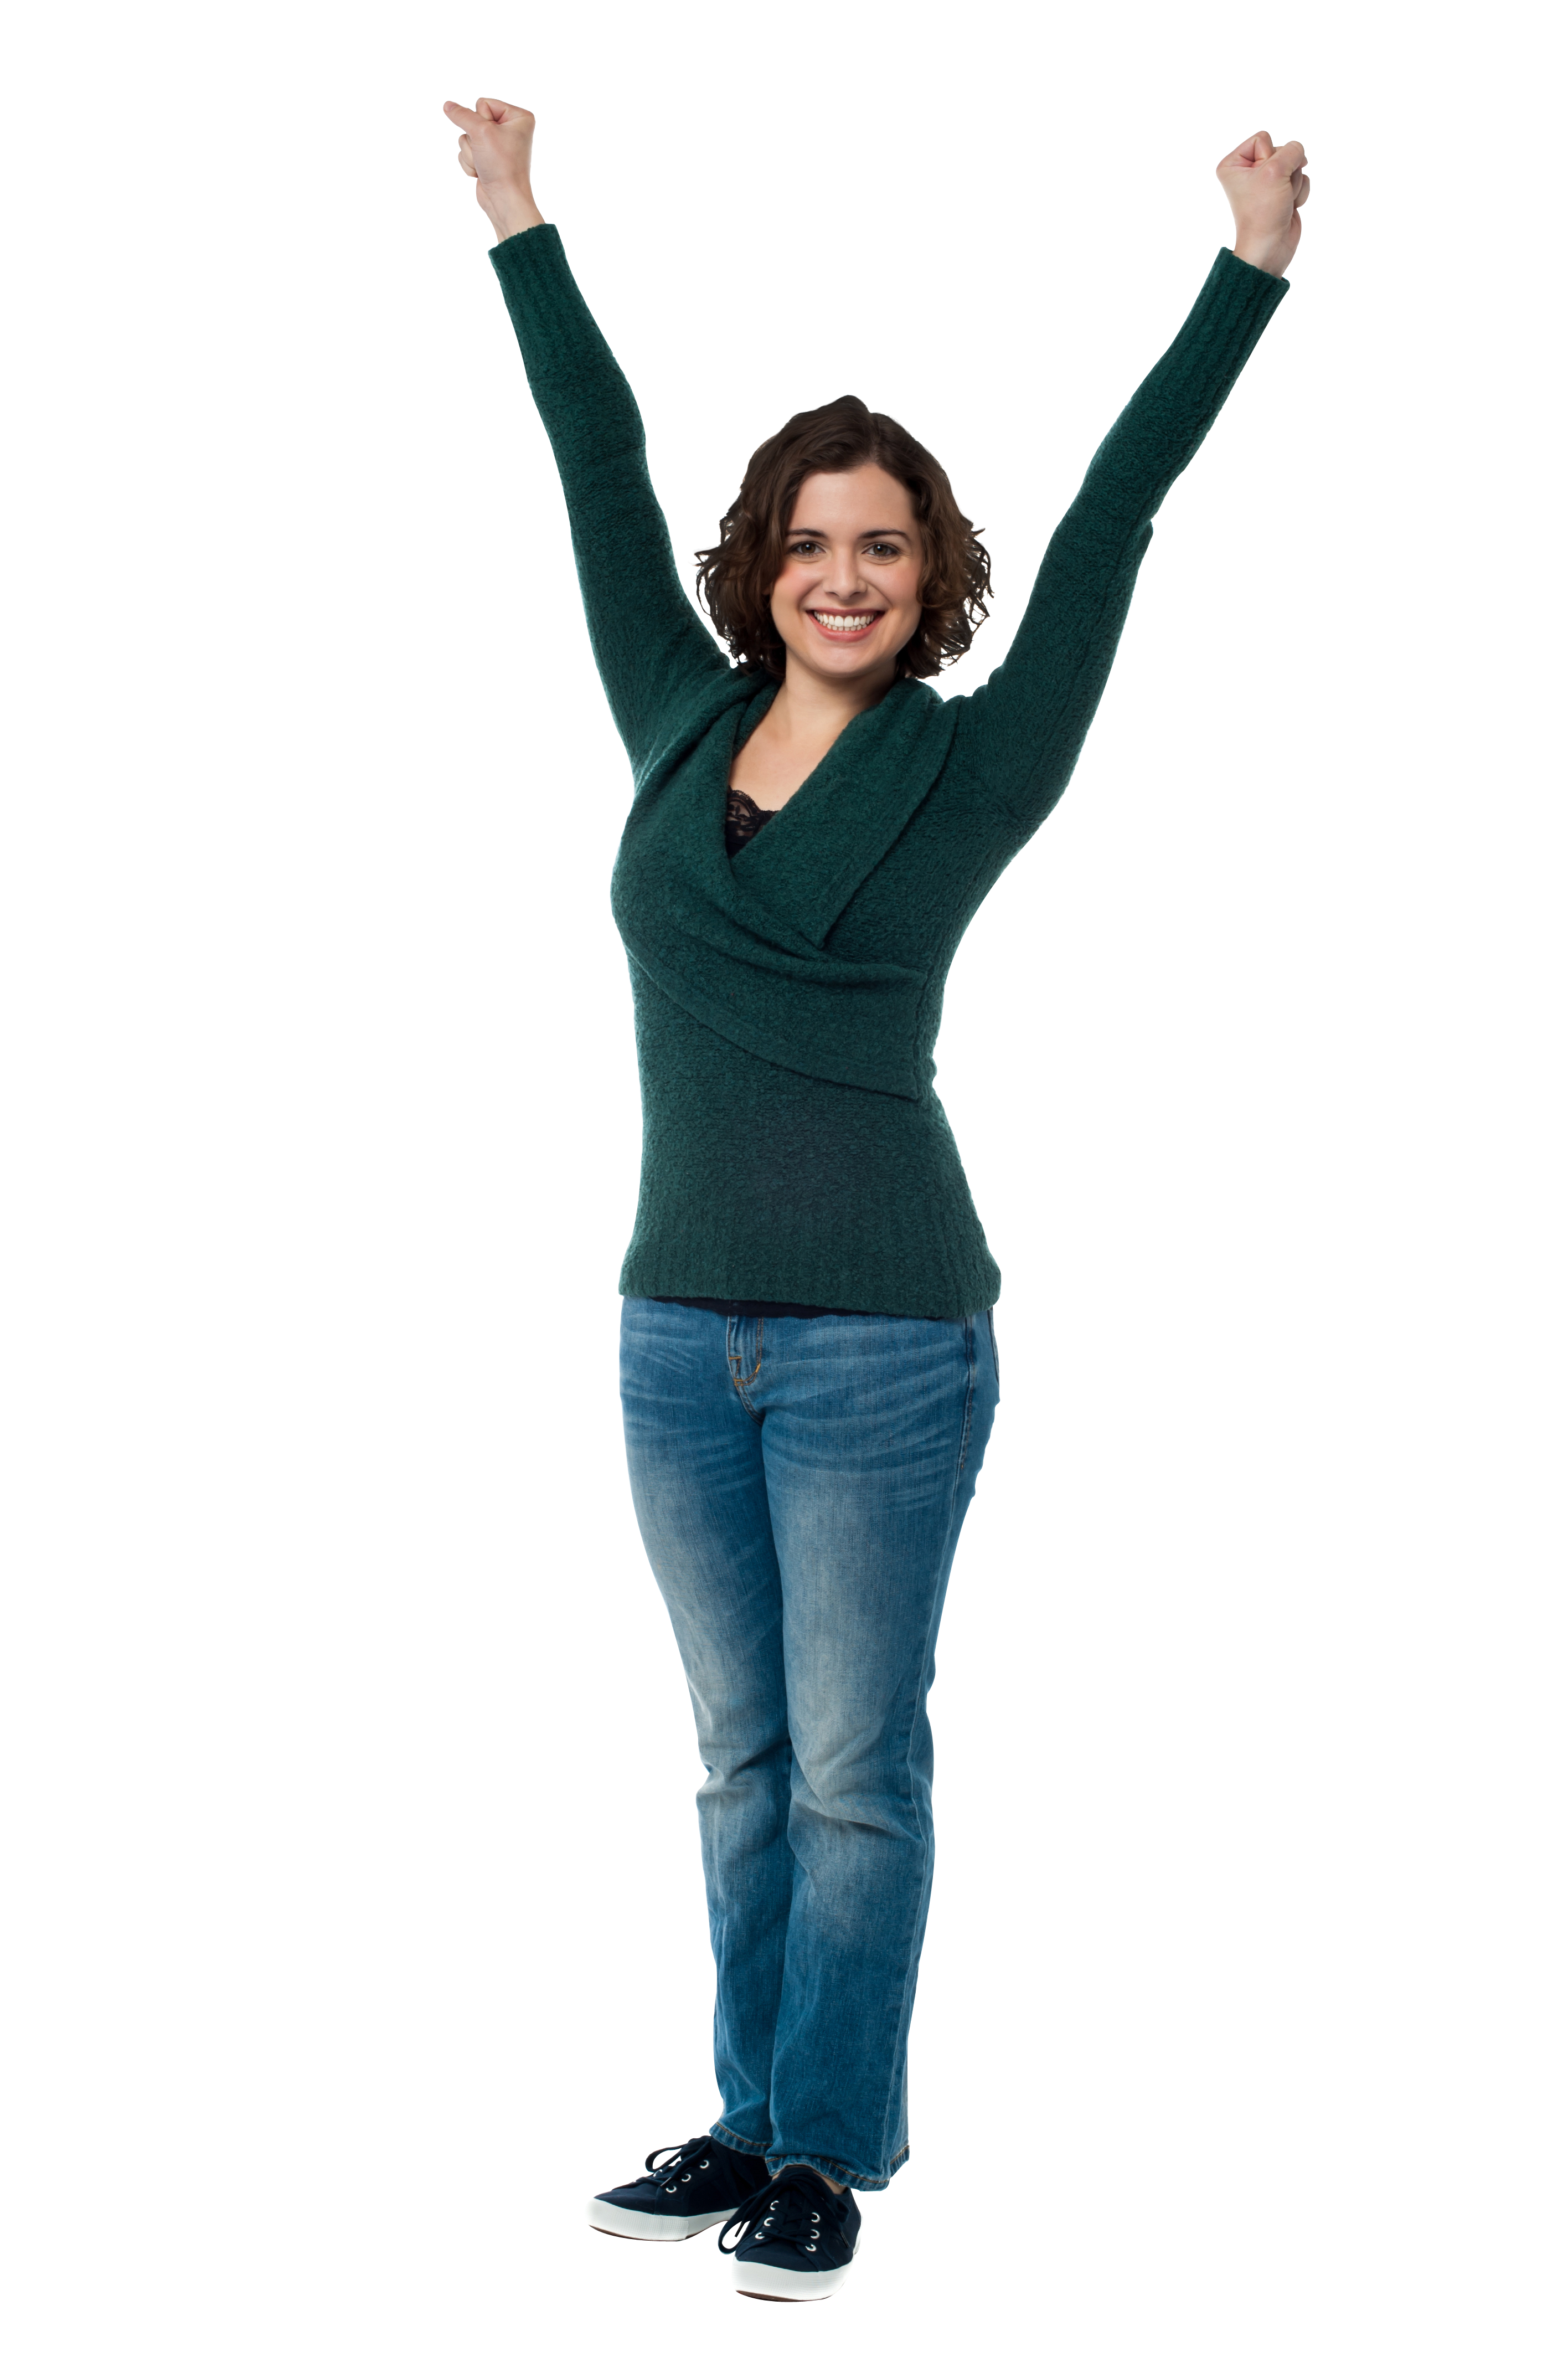 This high quality free PNG image without any background is about women, peo...